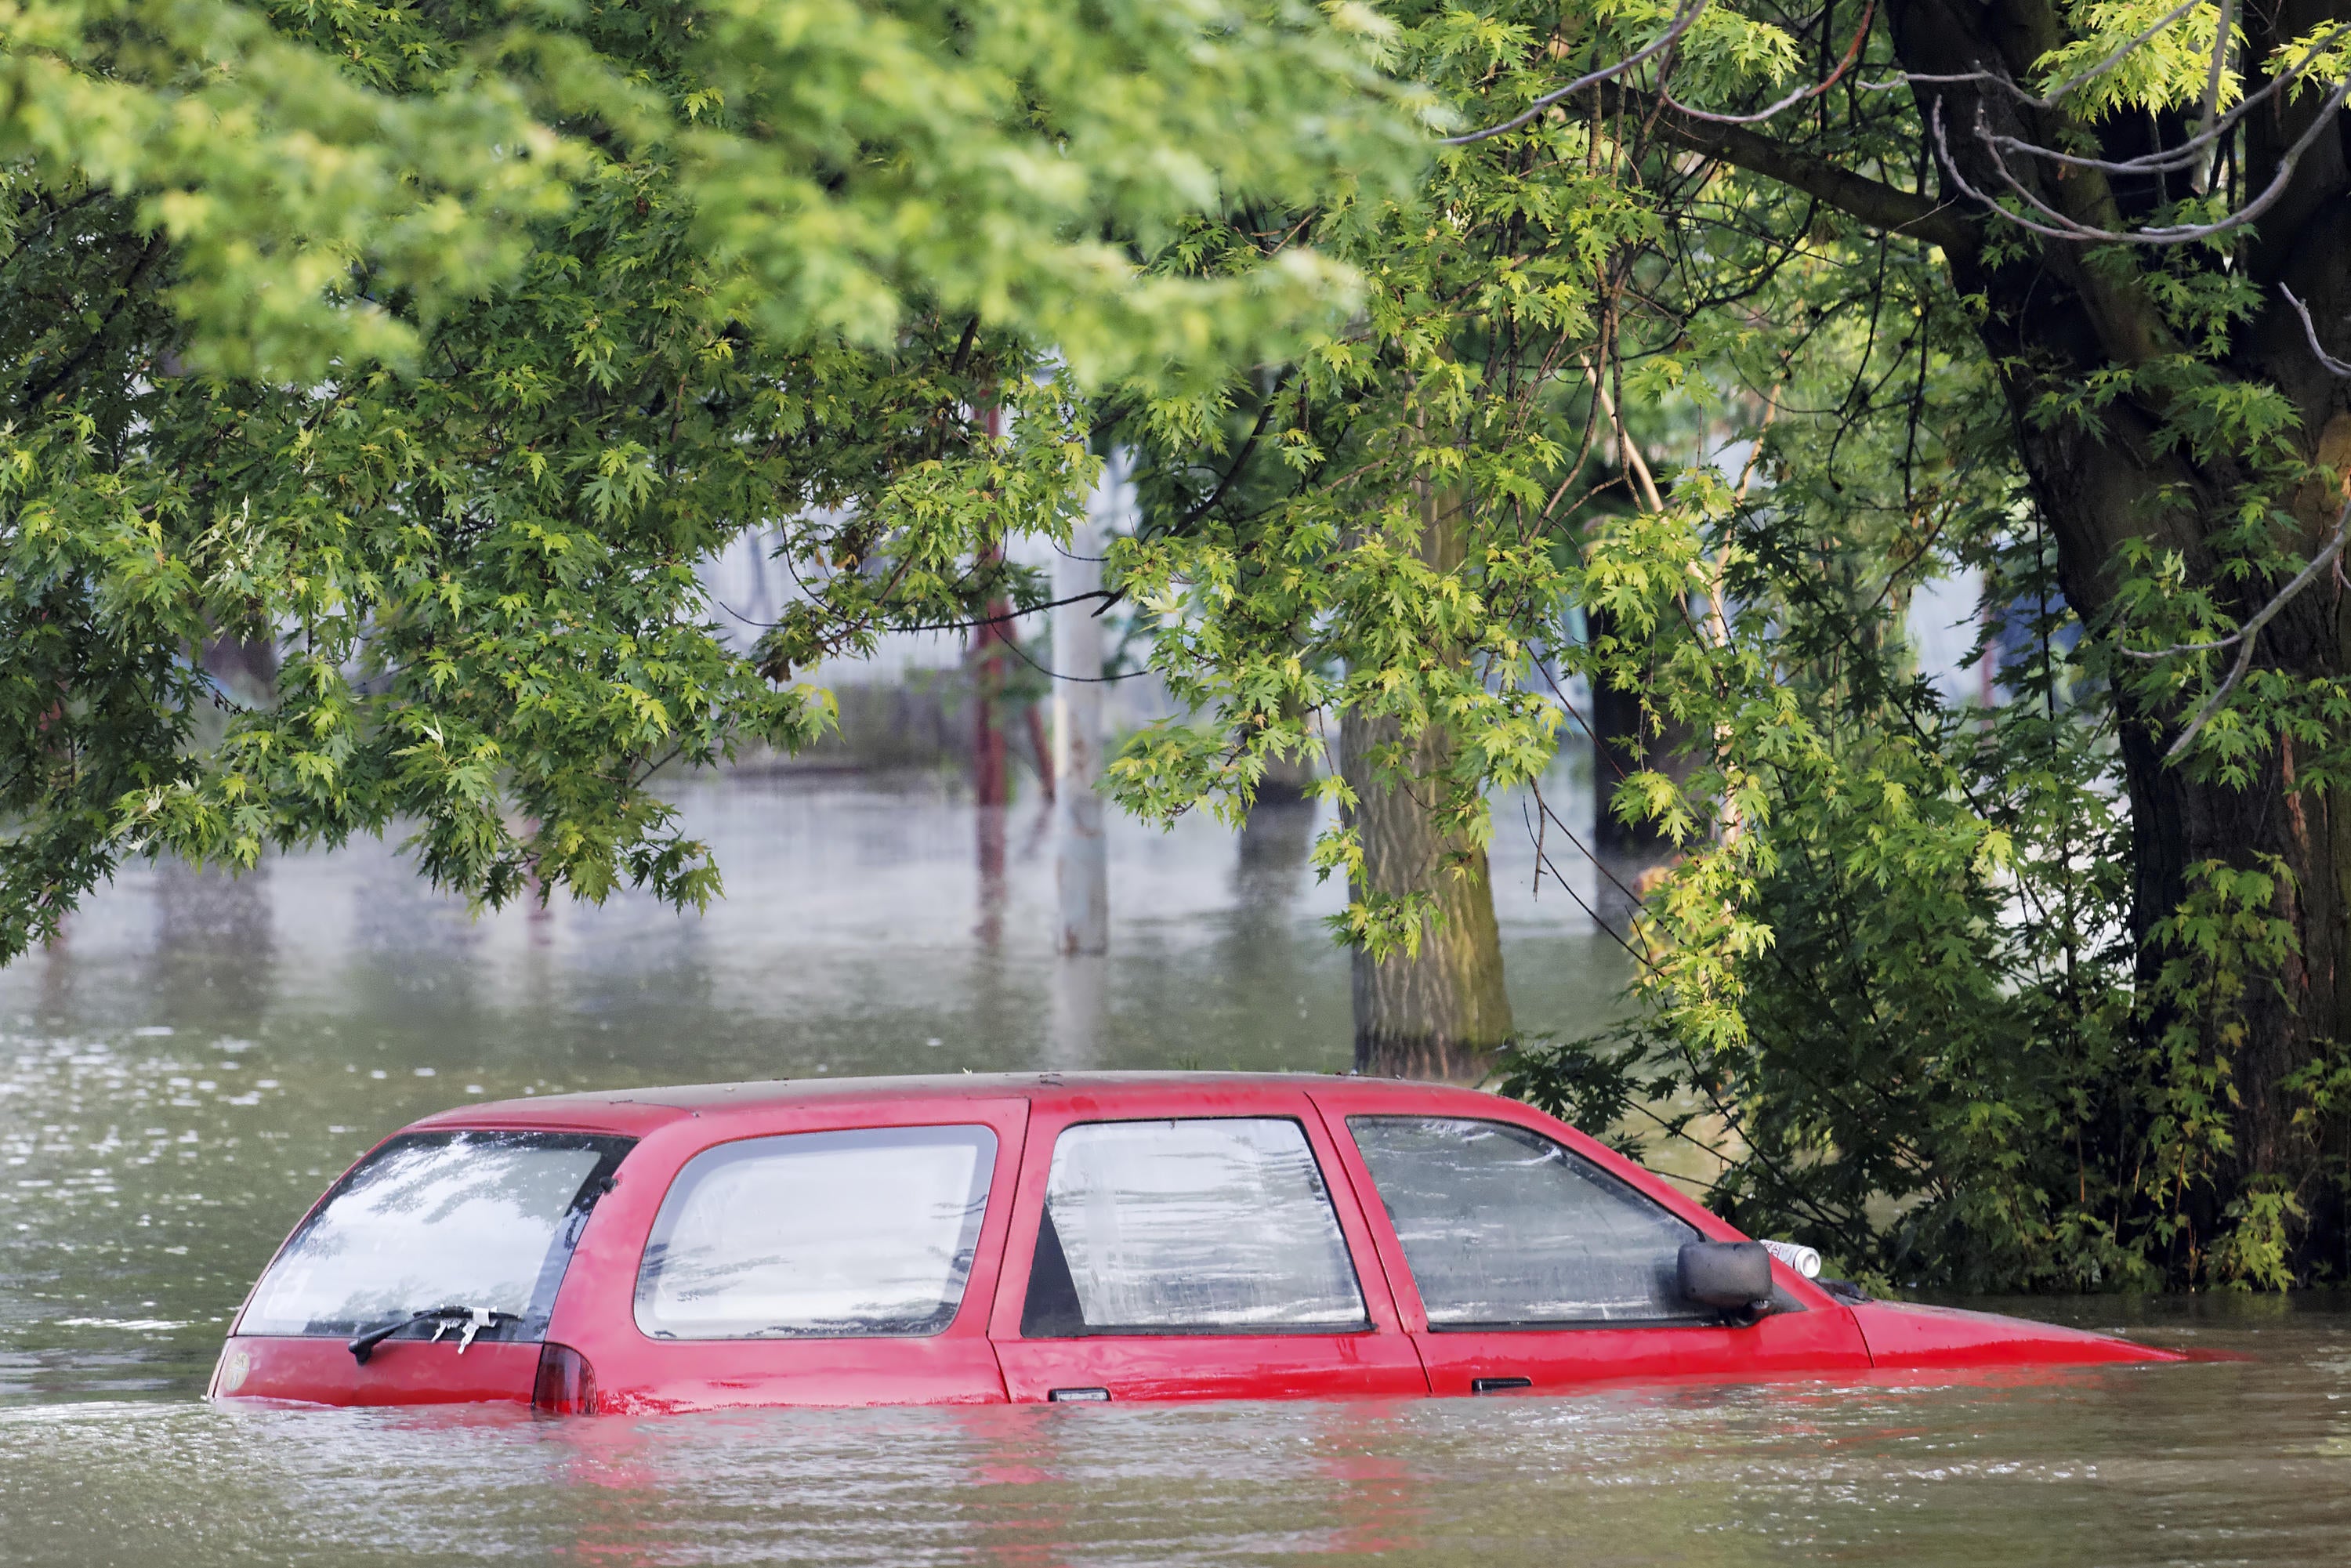 a SUV is submerged in flood waters on a city street